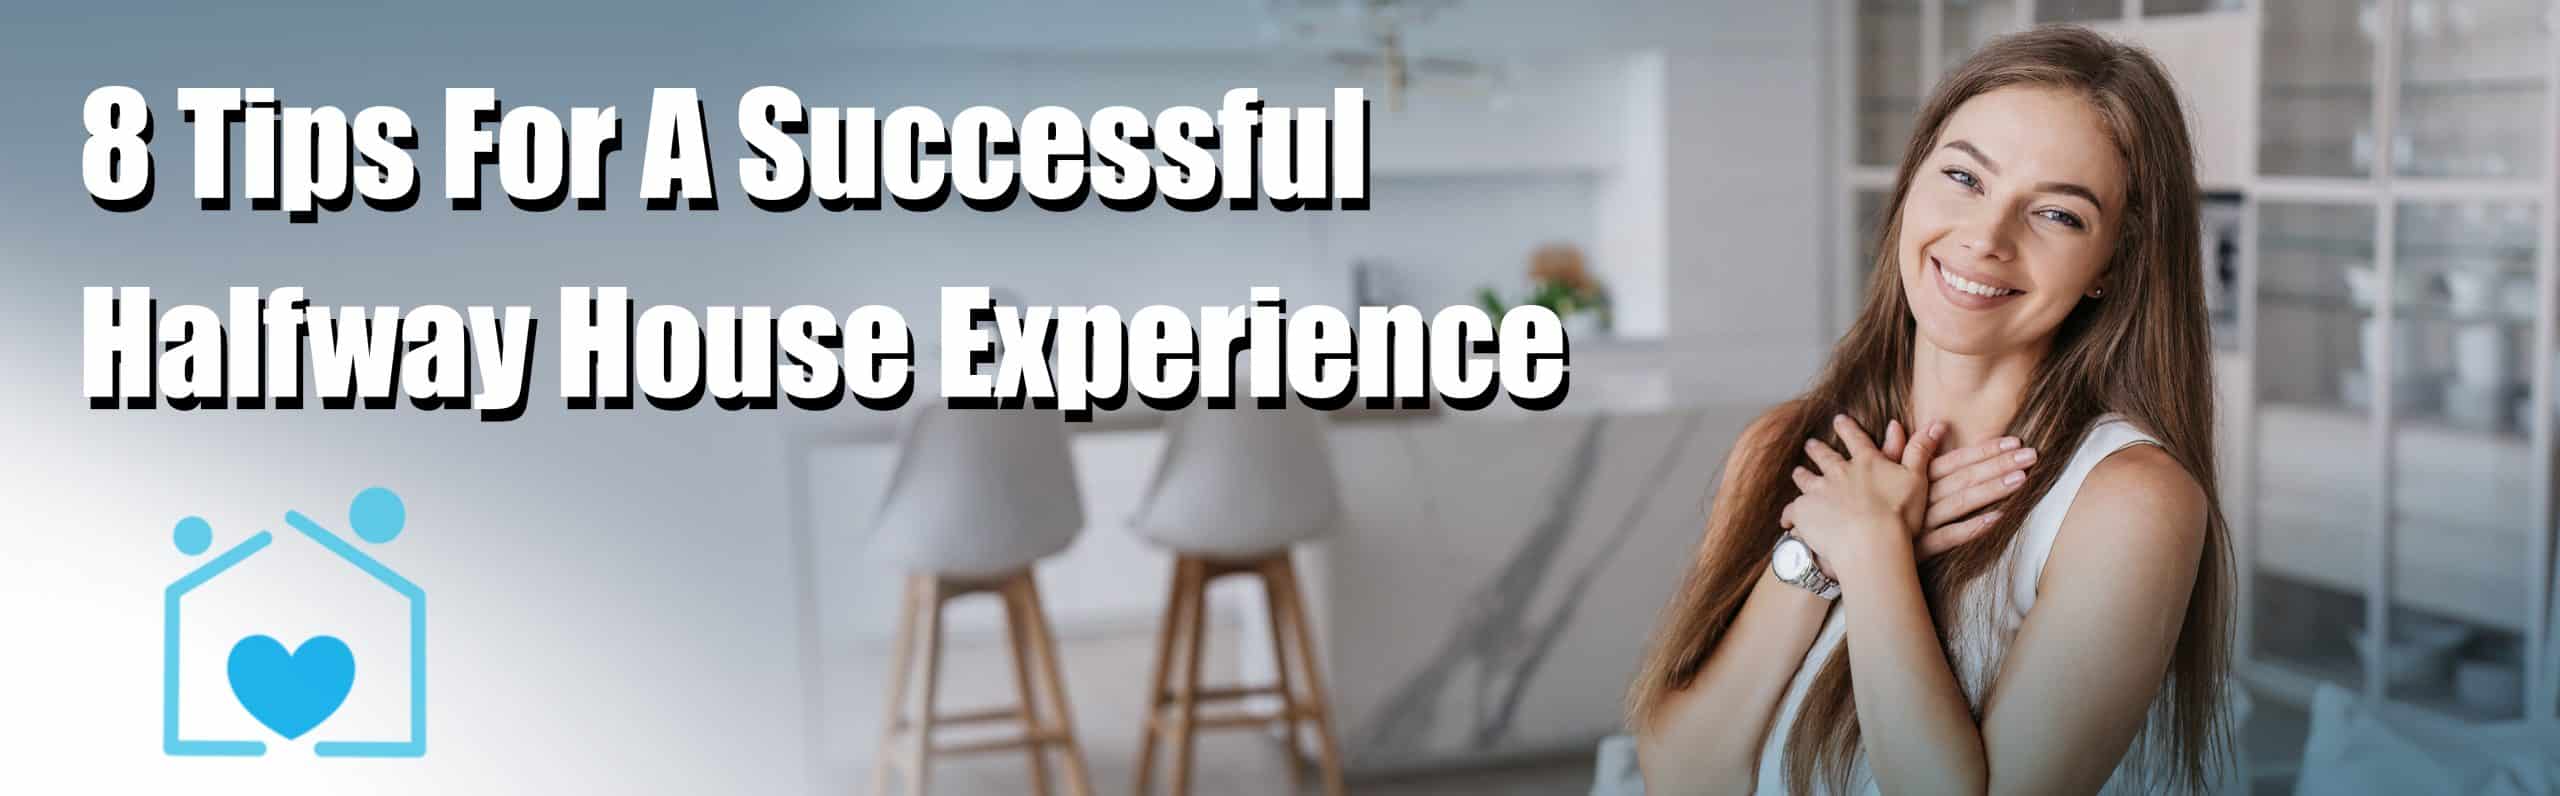 8 Tips For A Successful Halfway House Experience